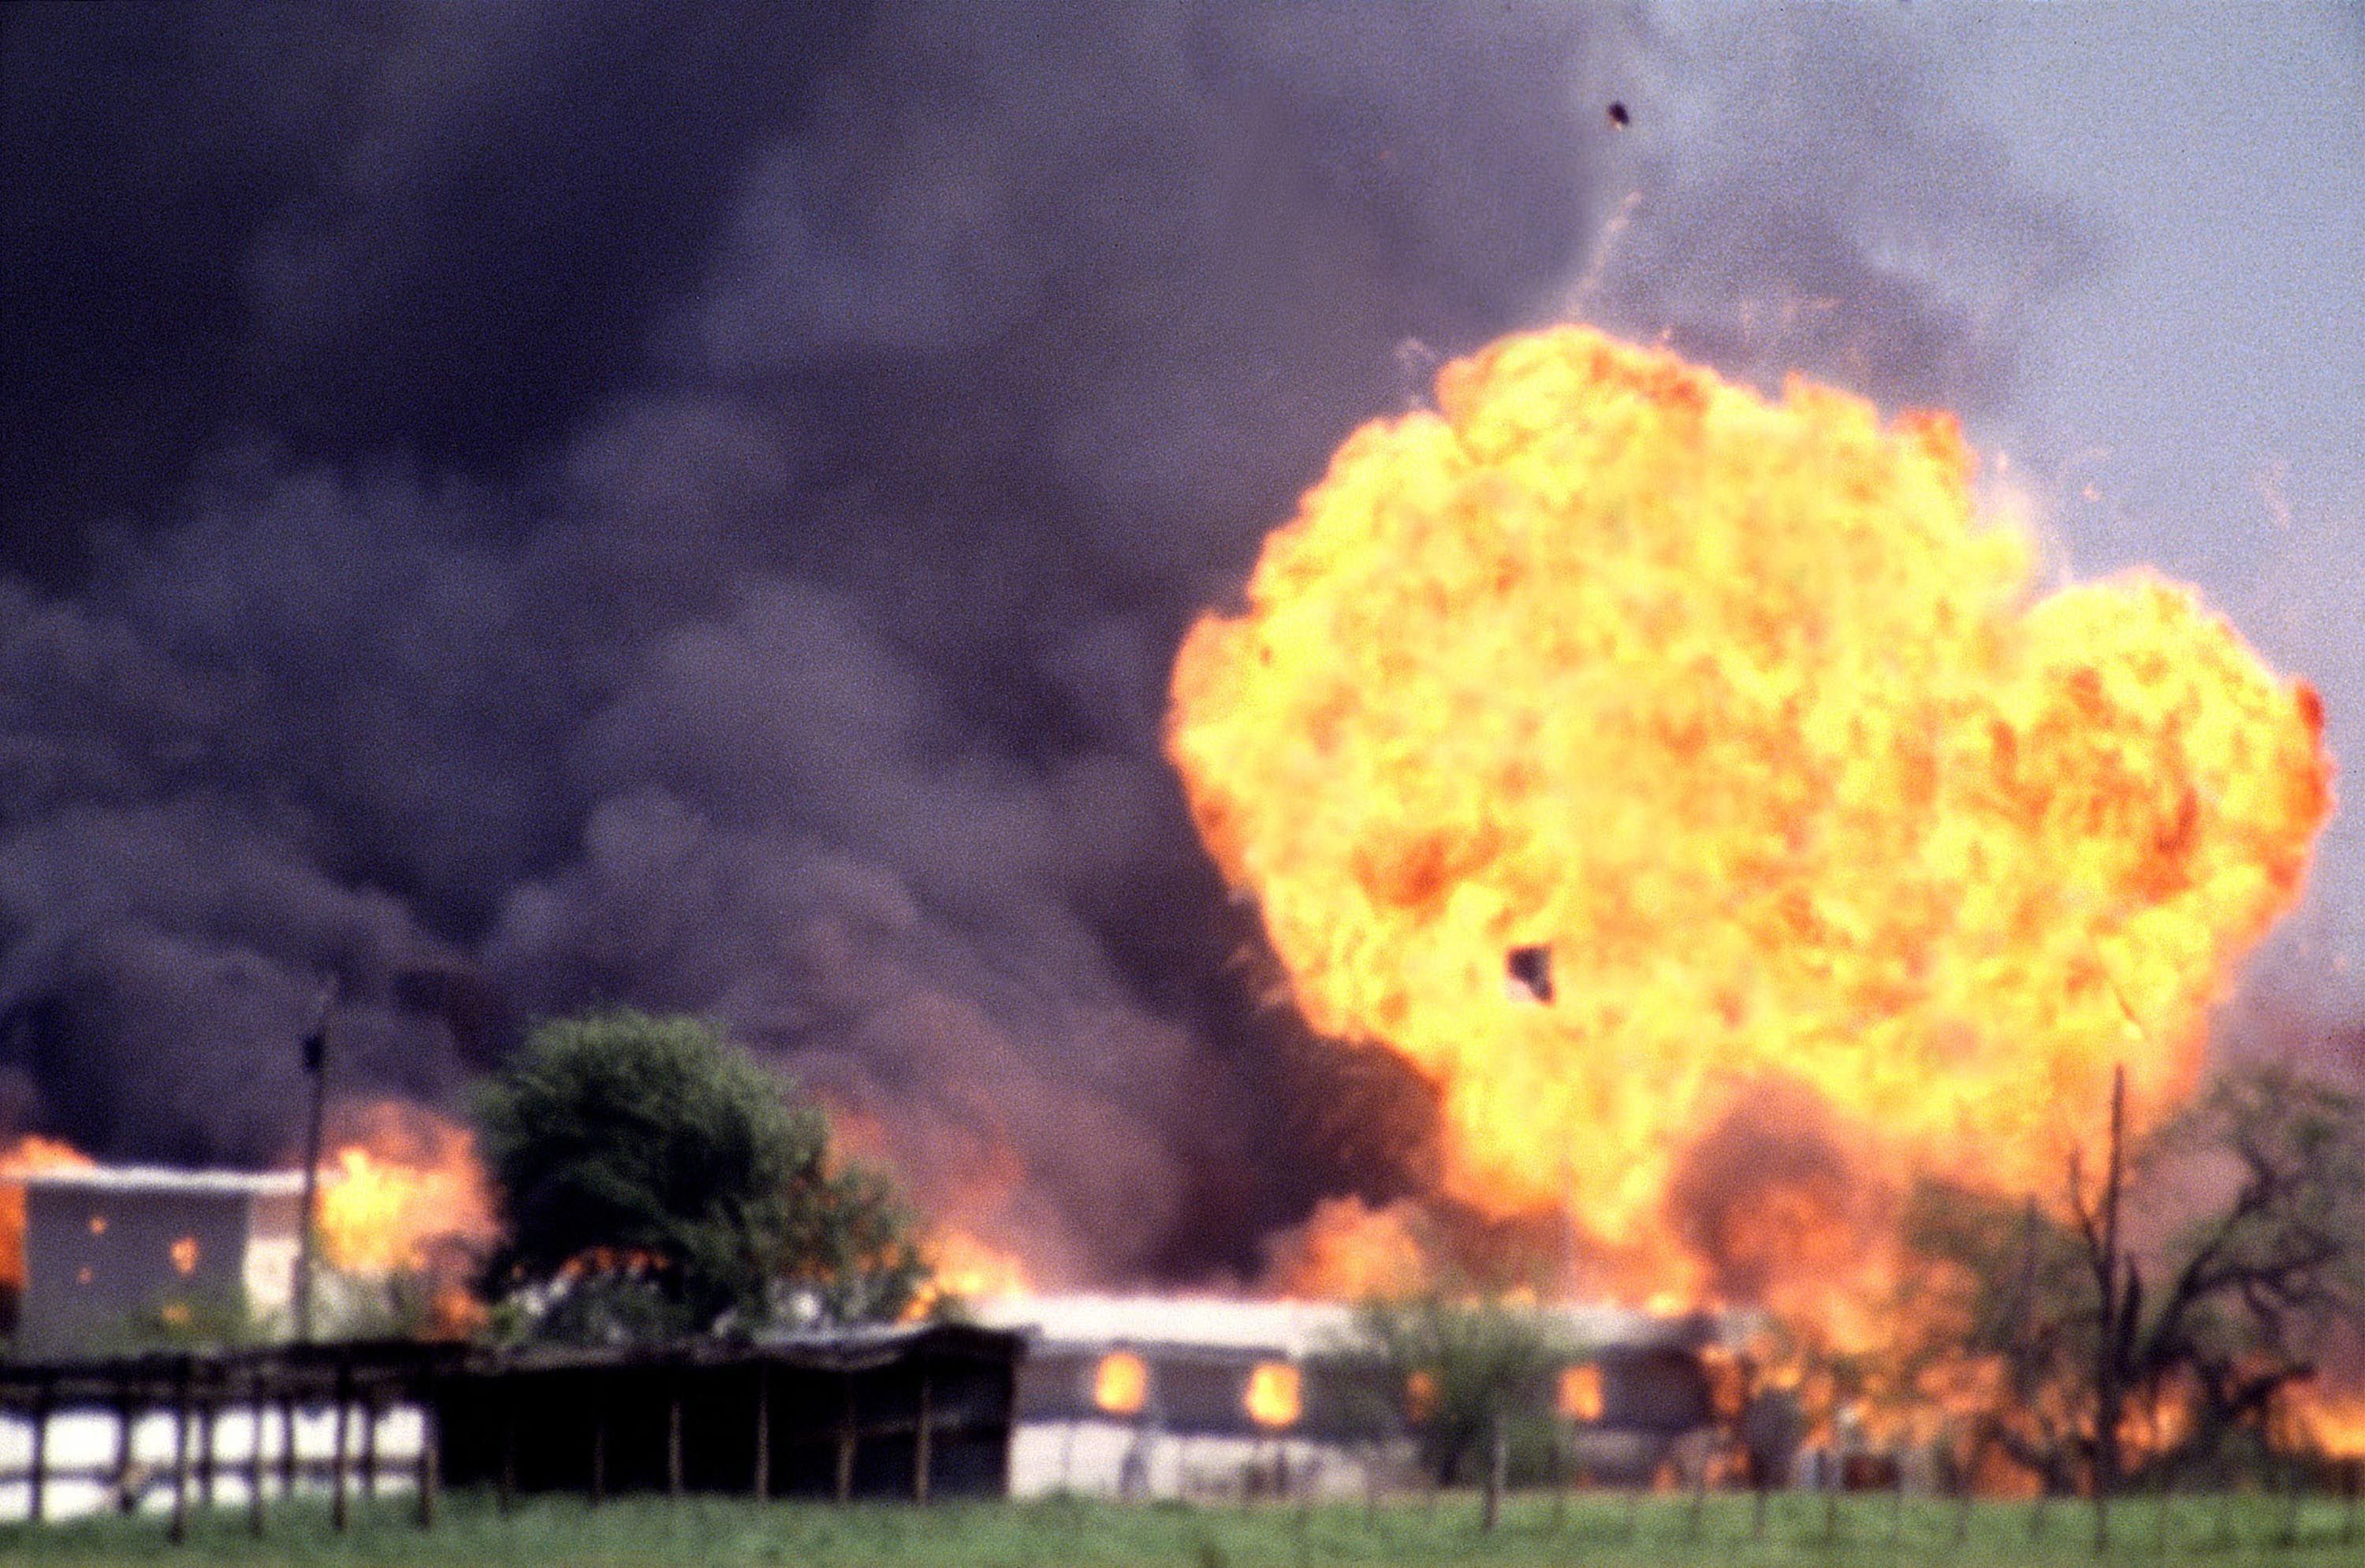 David Koresh and the Branch Davidians Standoff in Texas, Behind the Scenes